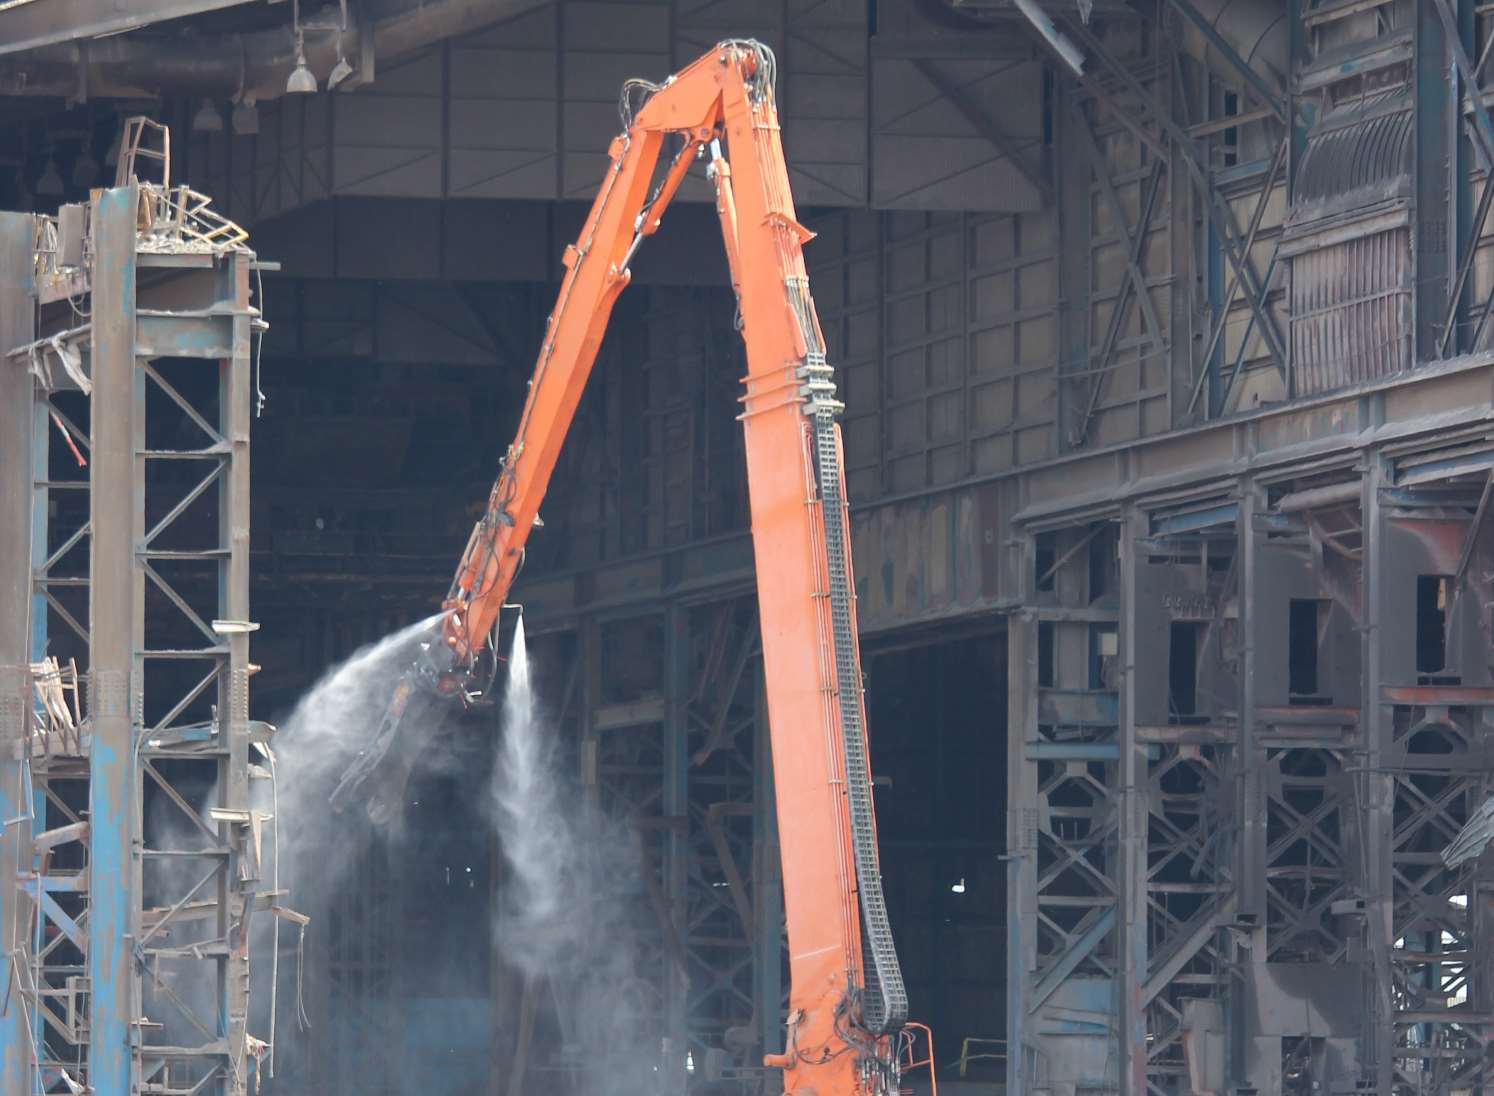 Watch it come down: this giant crane uses water jets as it rips down the steel skeleton.